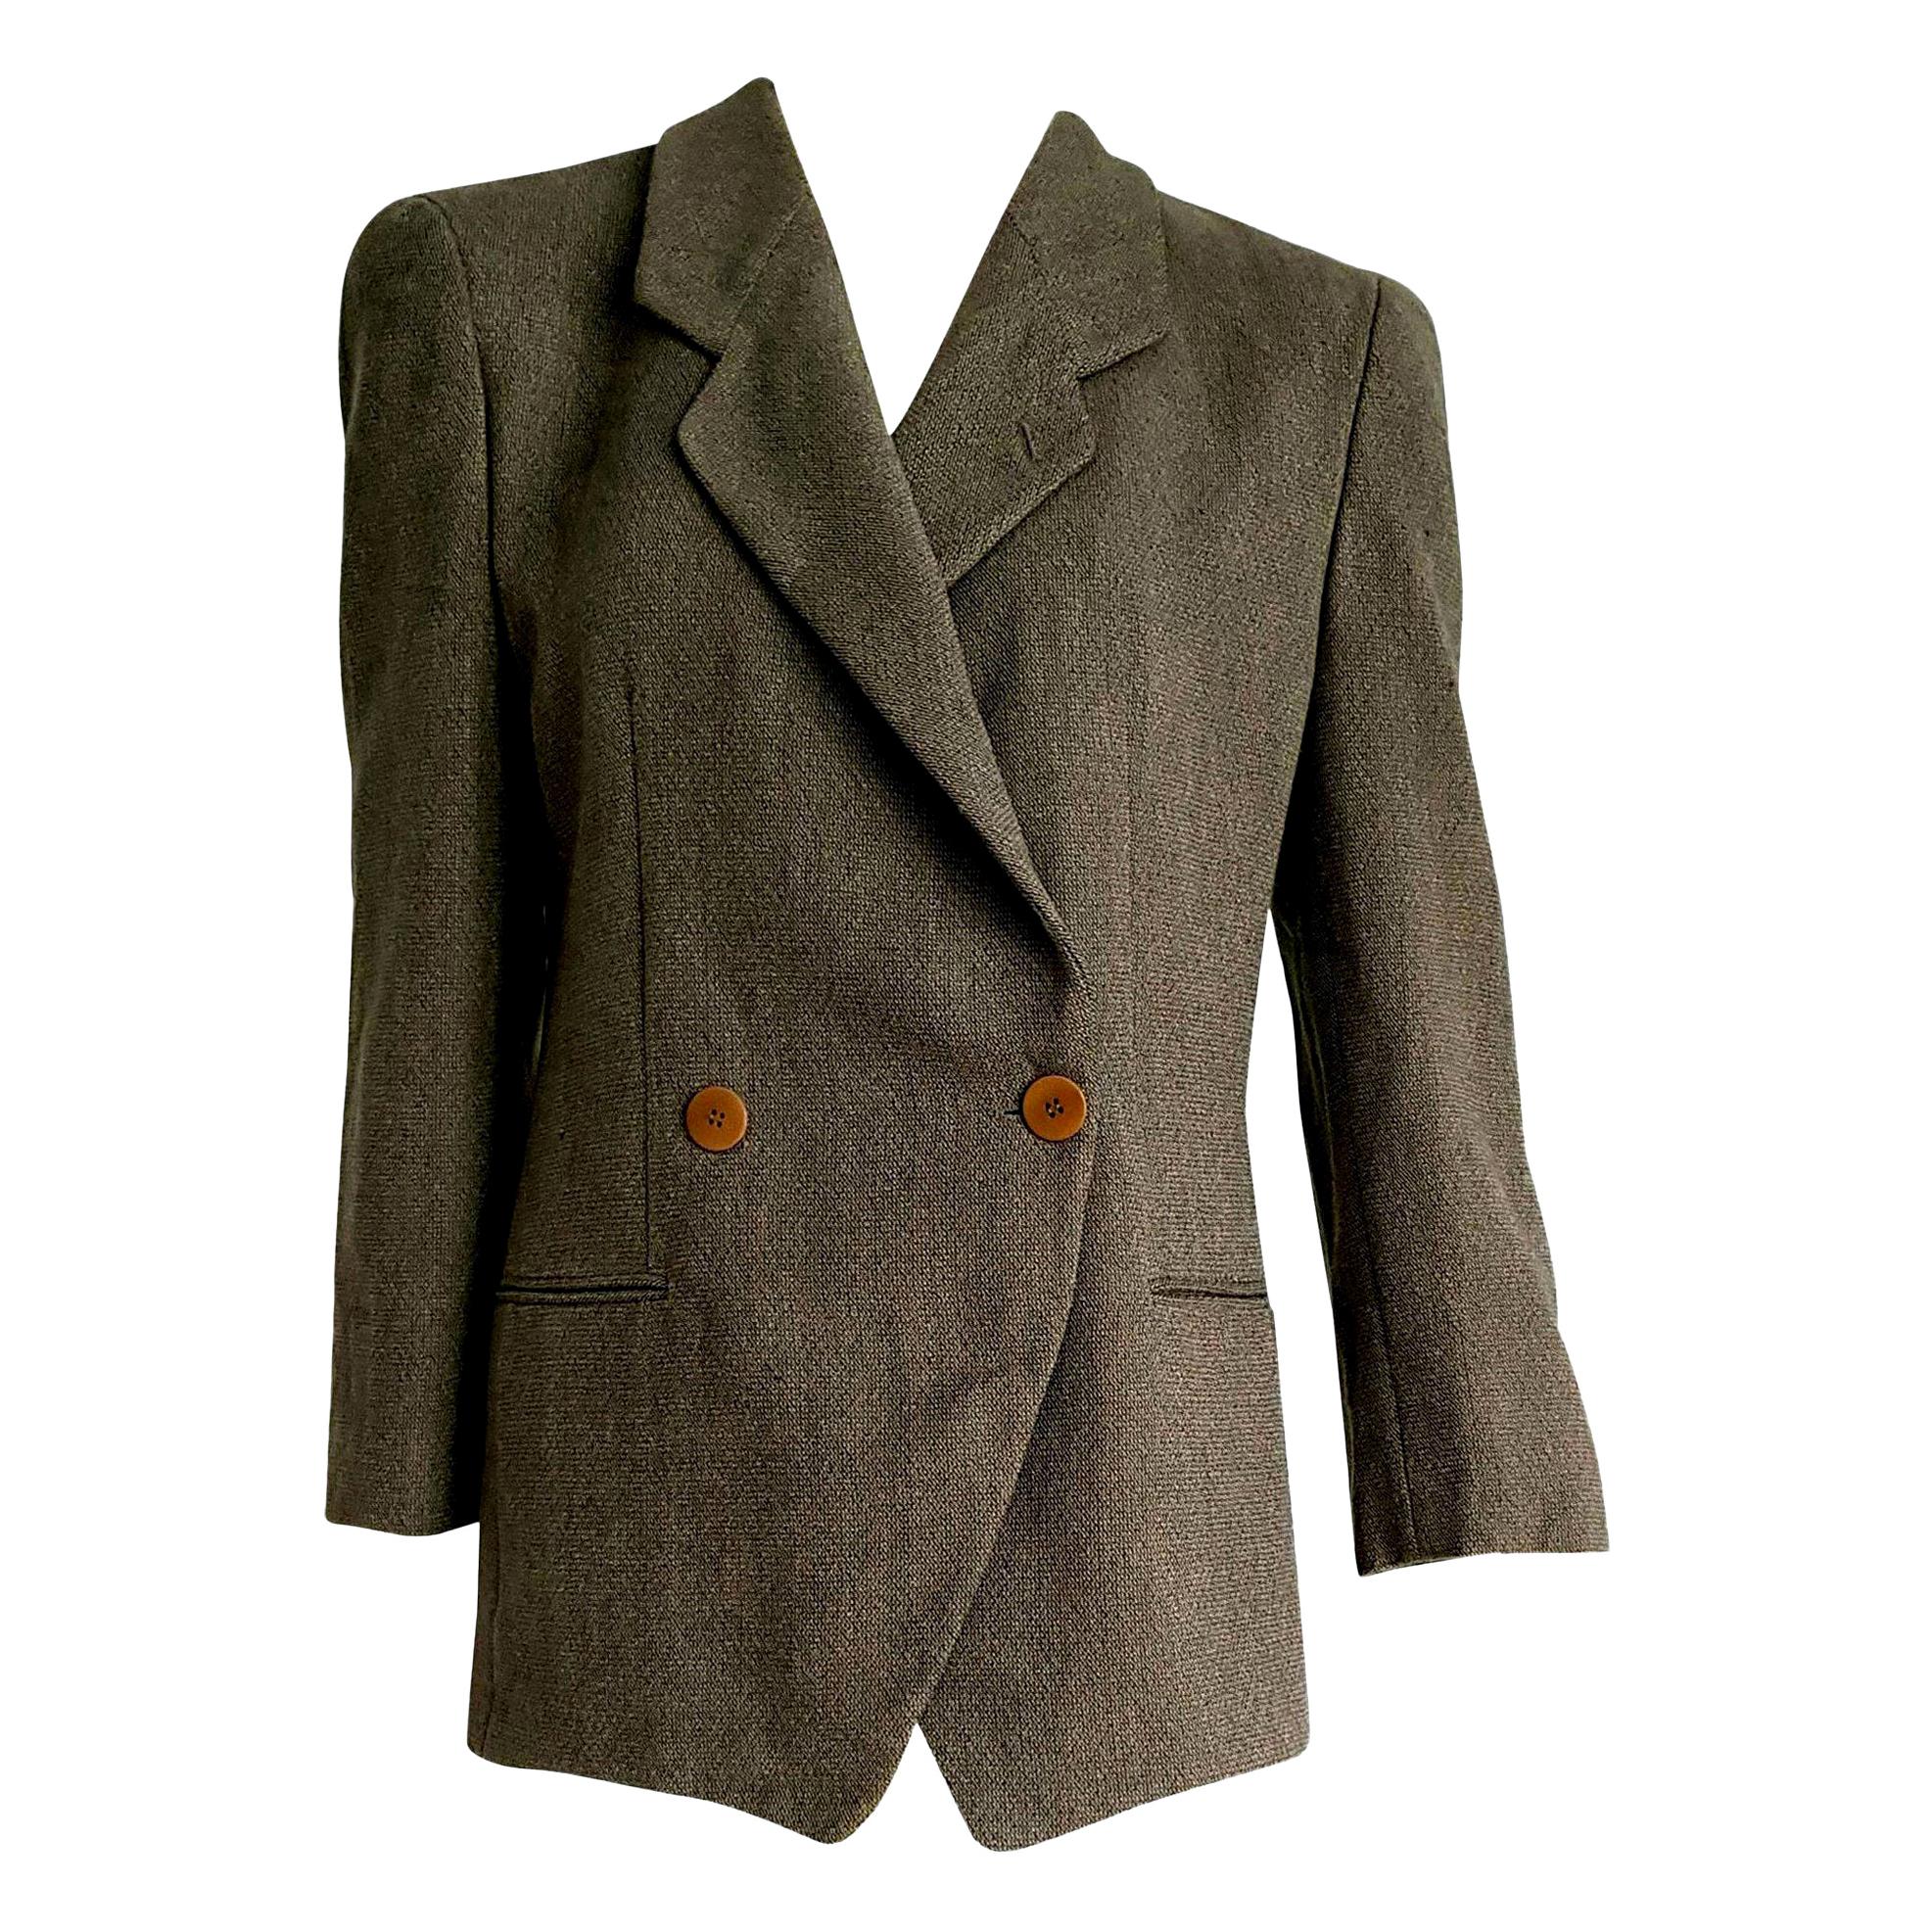 Giorgio ARMANI "New" Brown and Beige Double-Breasted Wool Jacket - Unworn For Sale